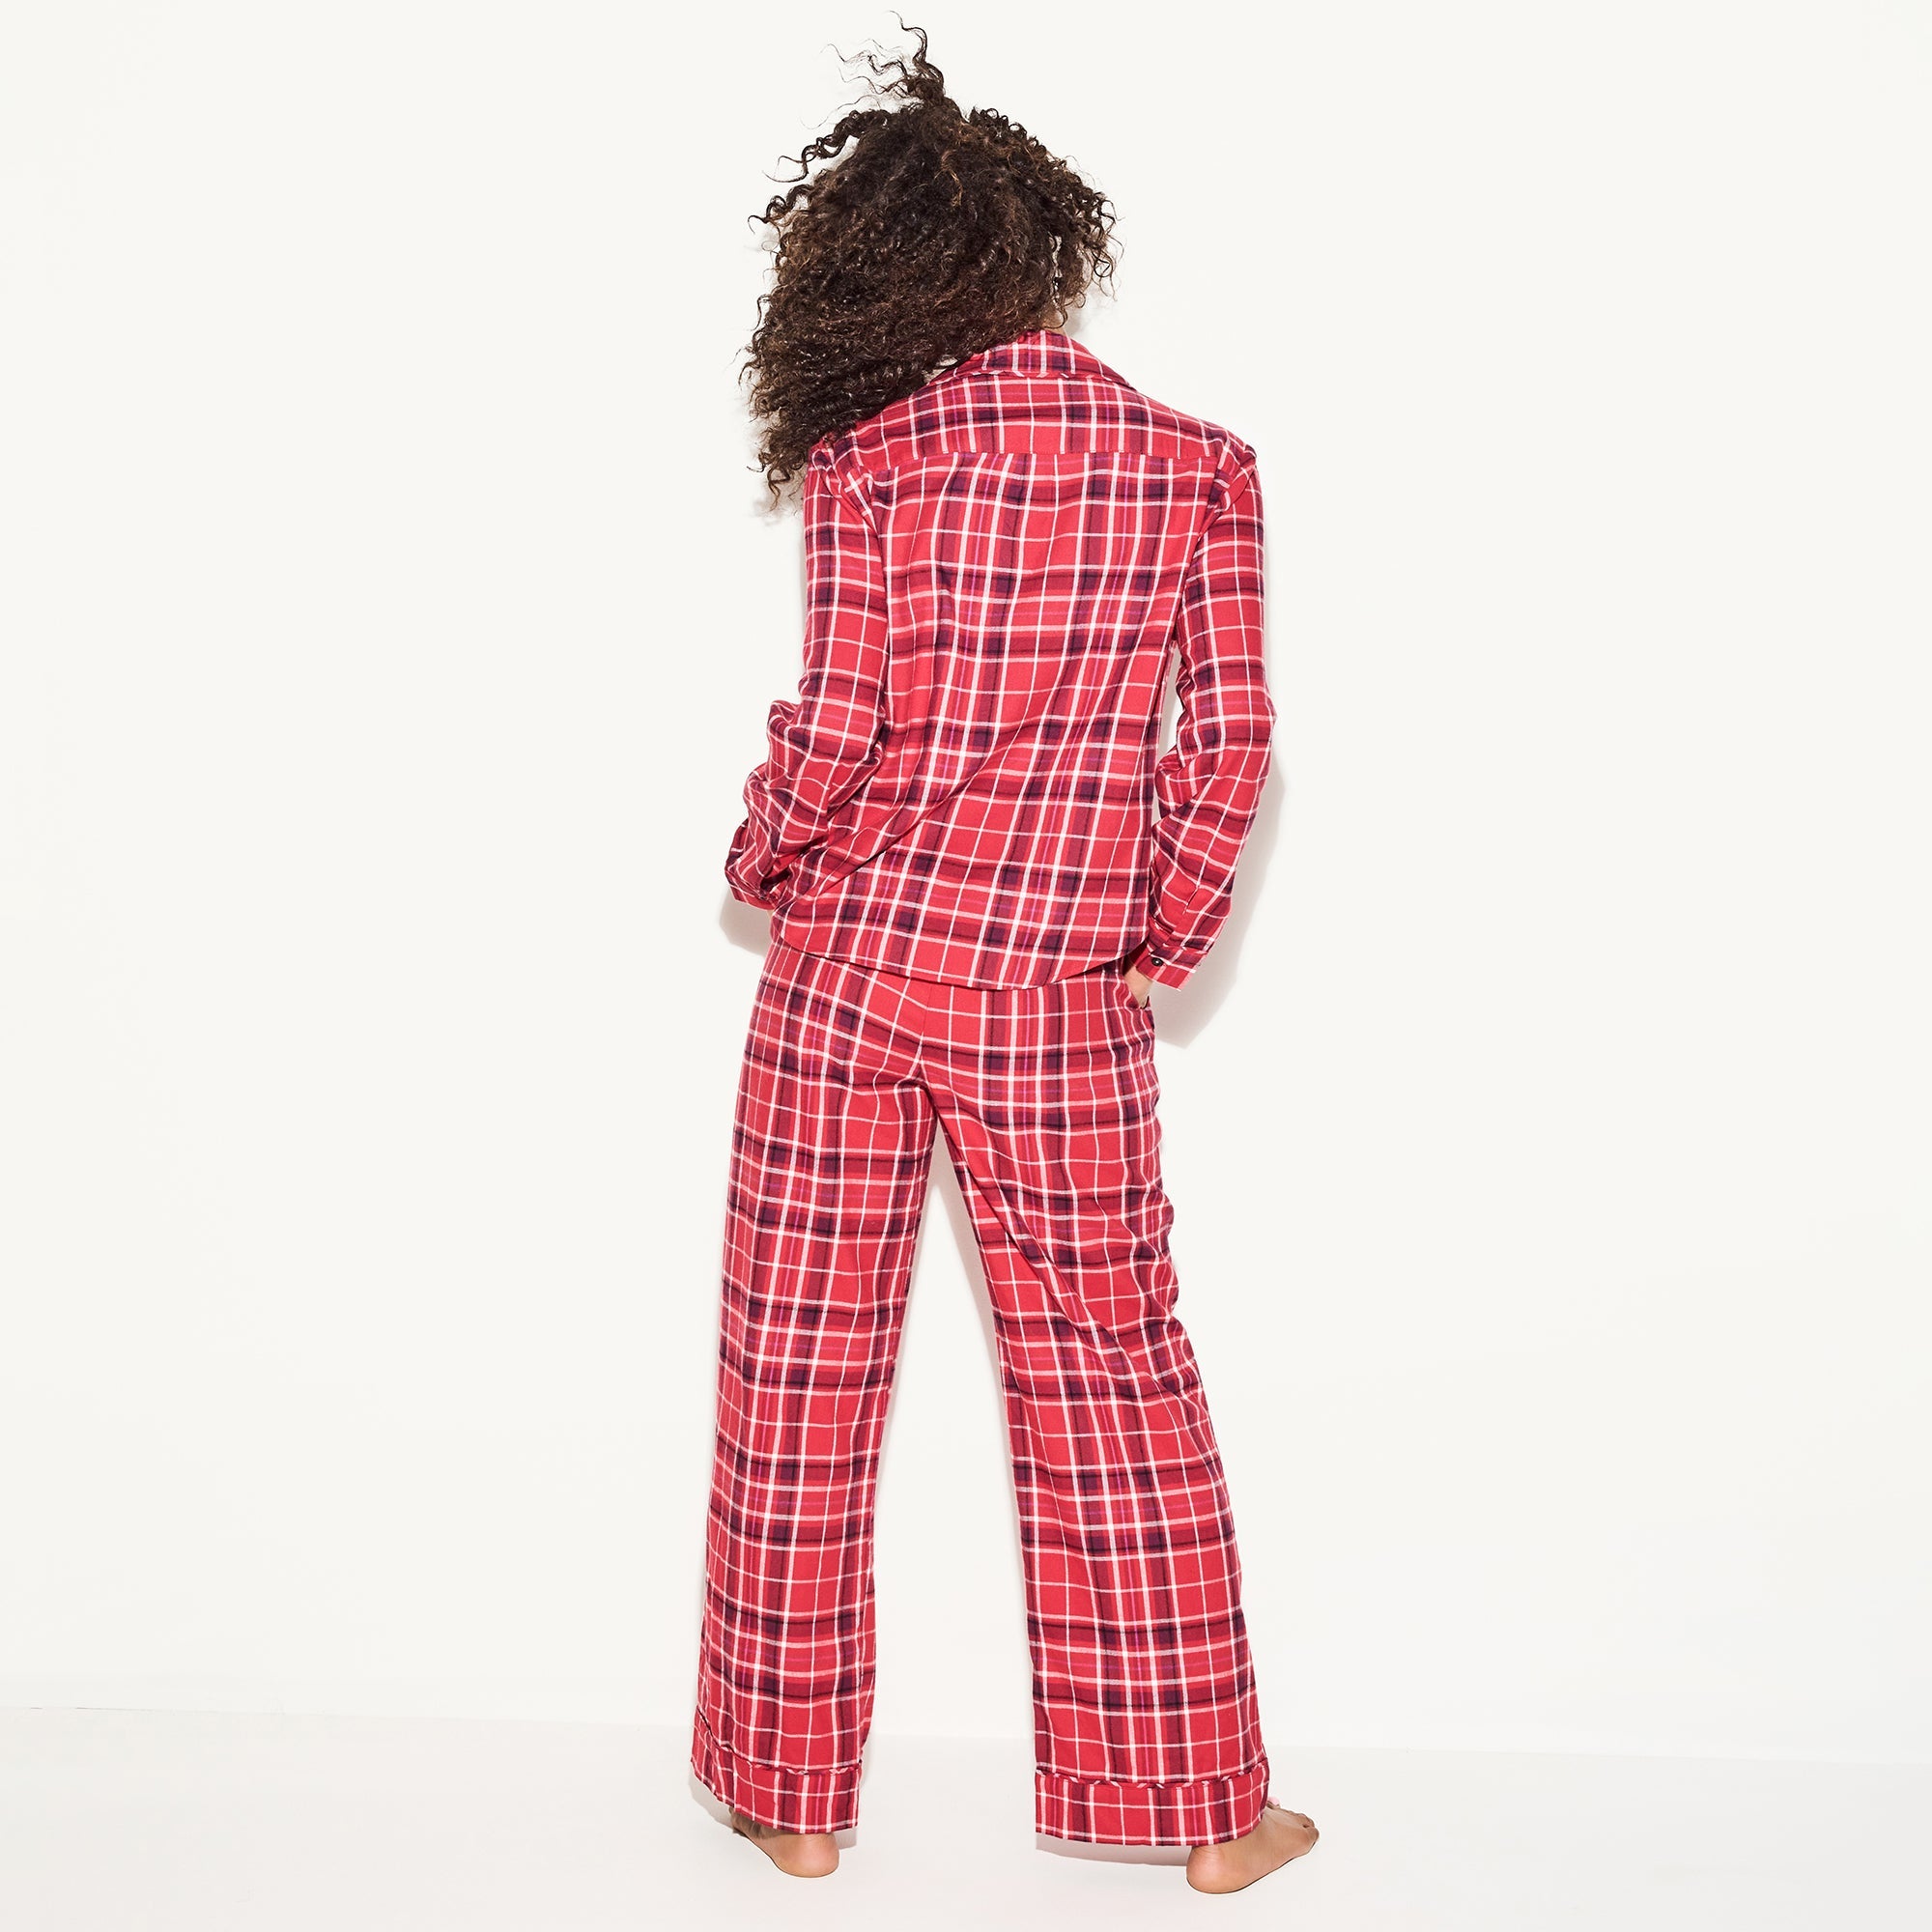 Flannel Sleep Crop Top: Sumptuous Pink/White Plaid by Playboy